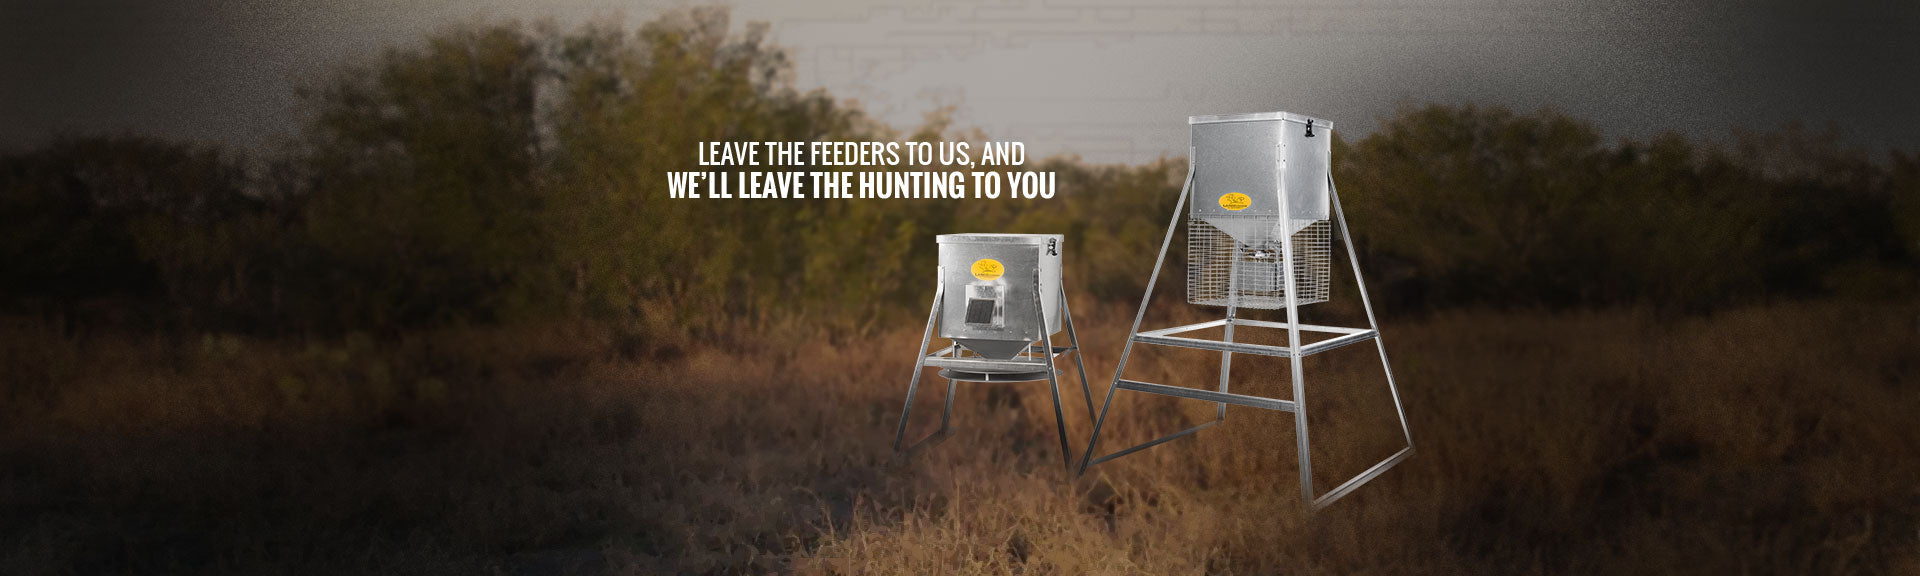 Leave the feeders to us and we'll leave the hunting to you.